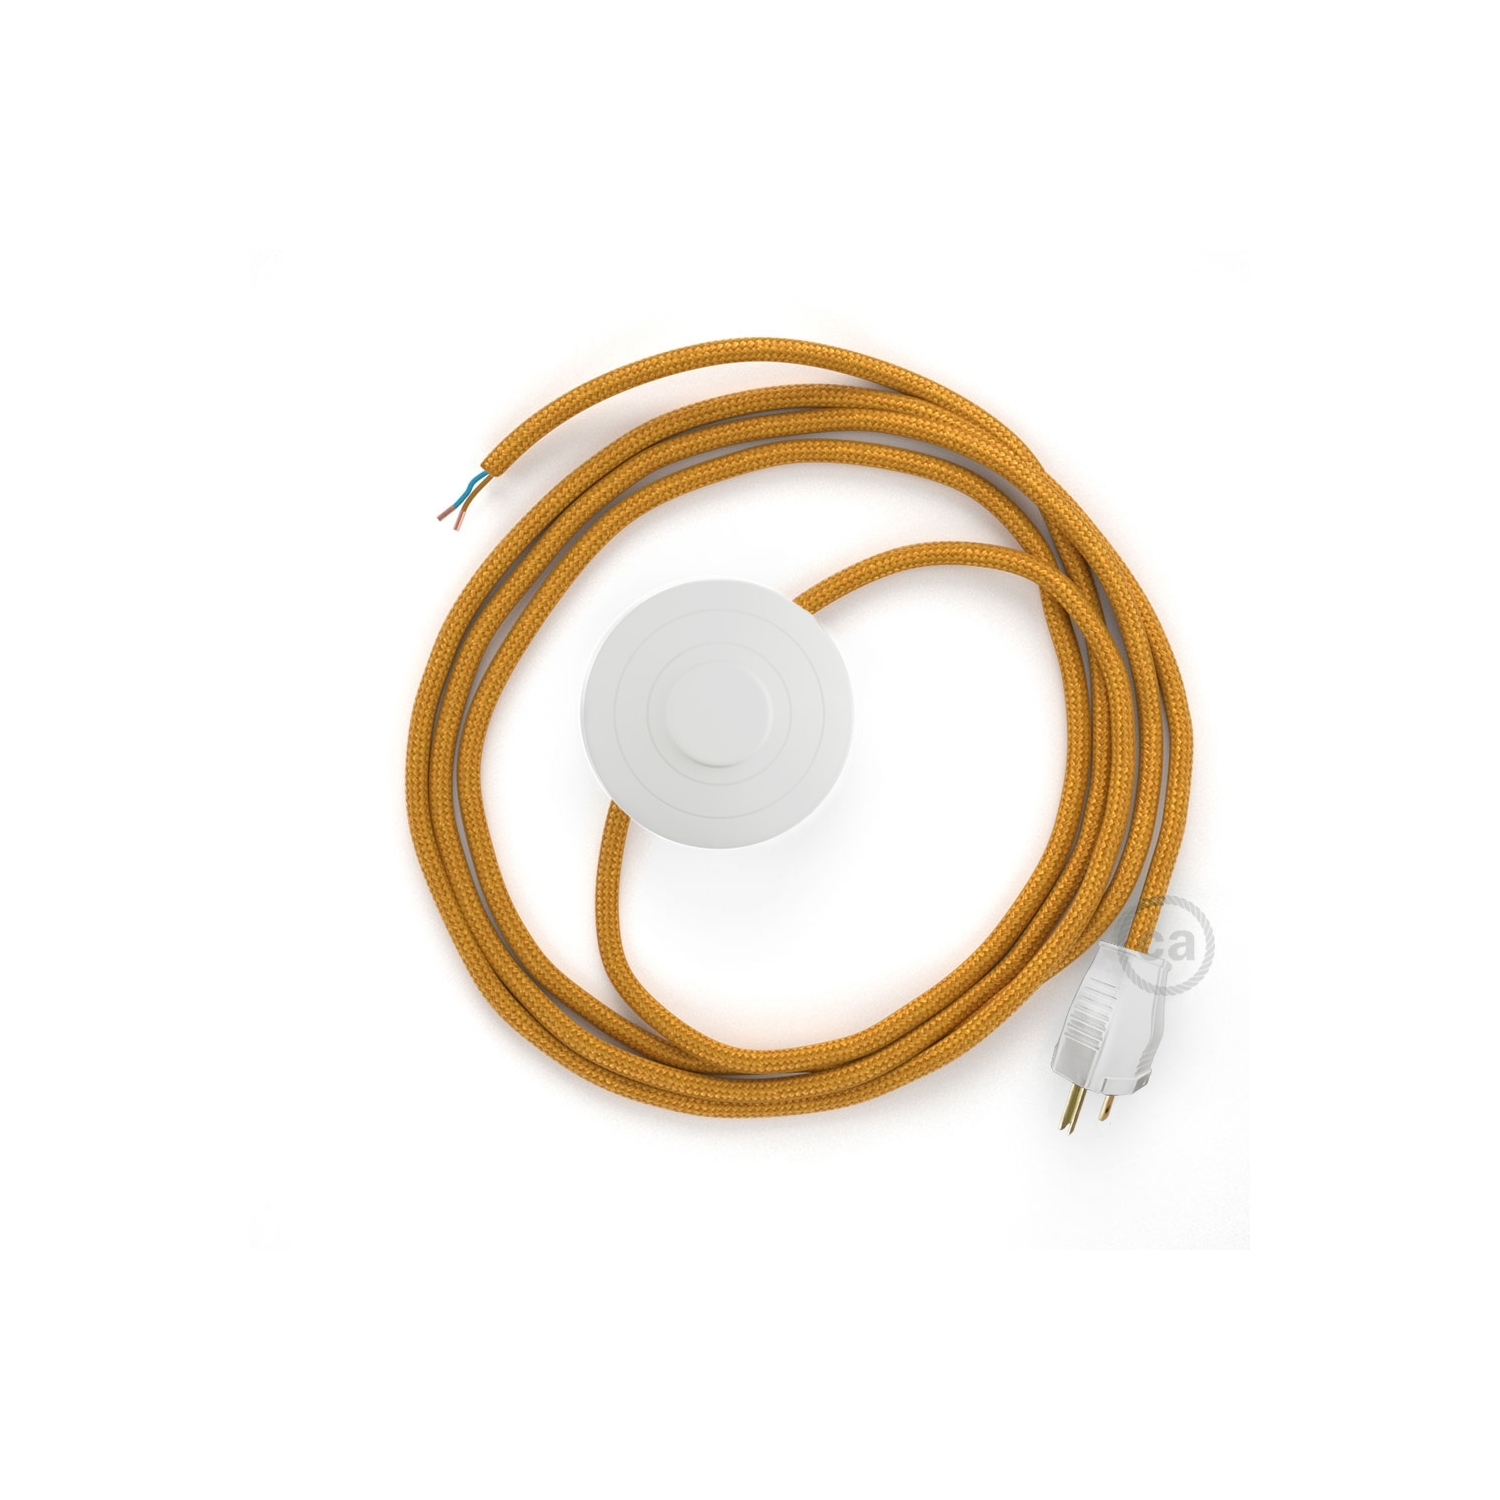 Power Cord with foot switch, RM05 Gold Rayon - Choose color of switch/plug